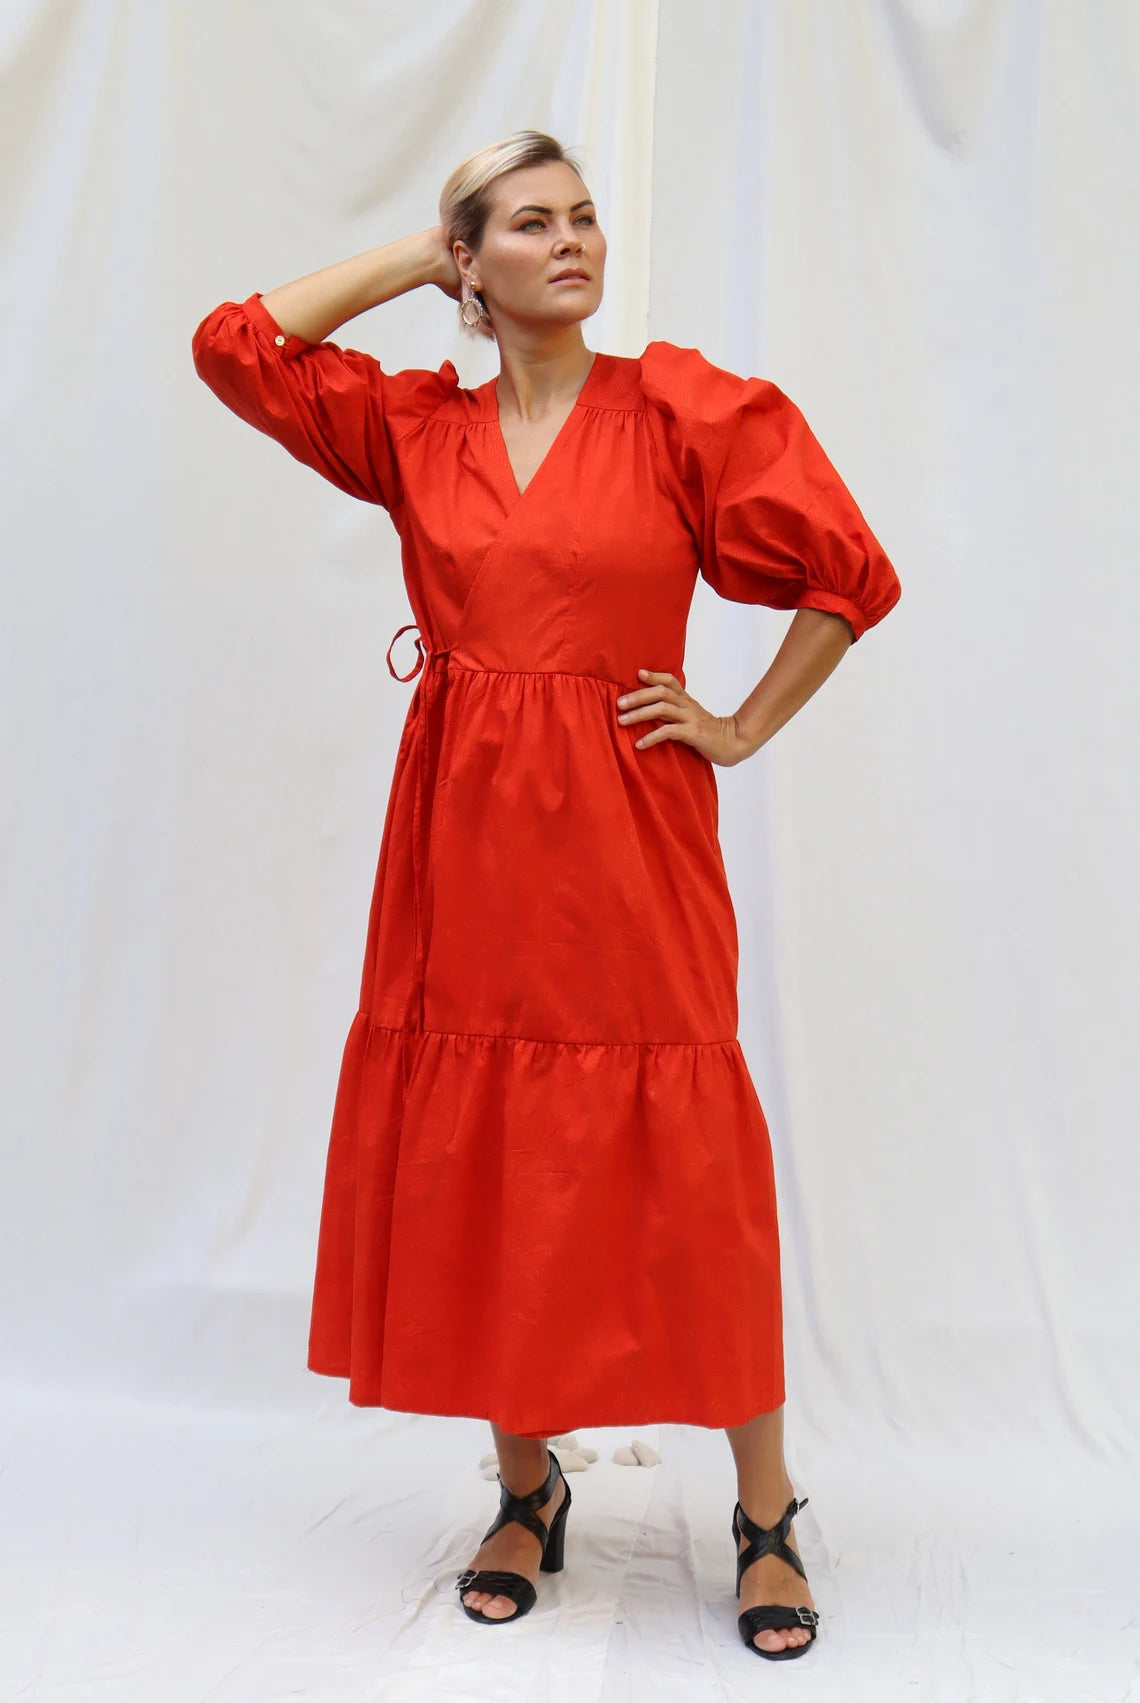 LIMITED EDITION. Uniquely hand dyed cotton dress\ Wrap dress\ cotton MIDI dress with puffy sleeves \ Casual cotton dress